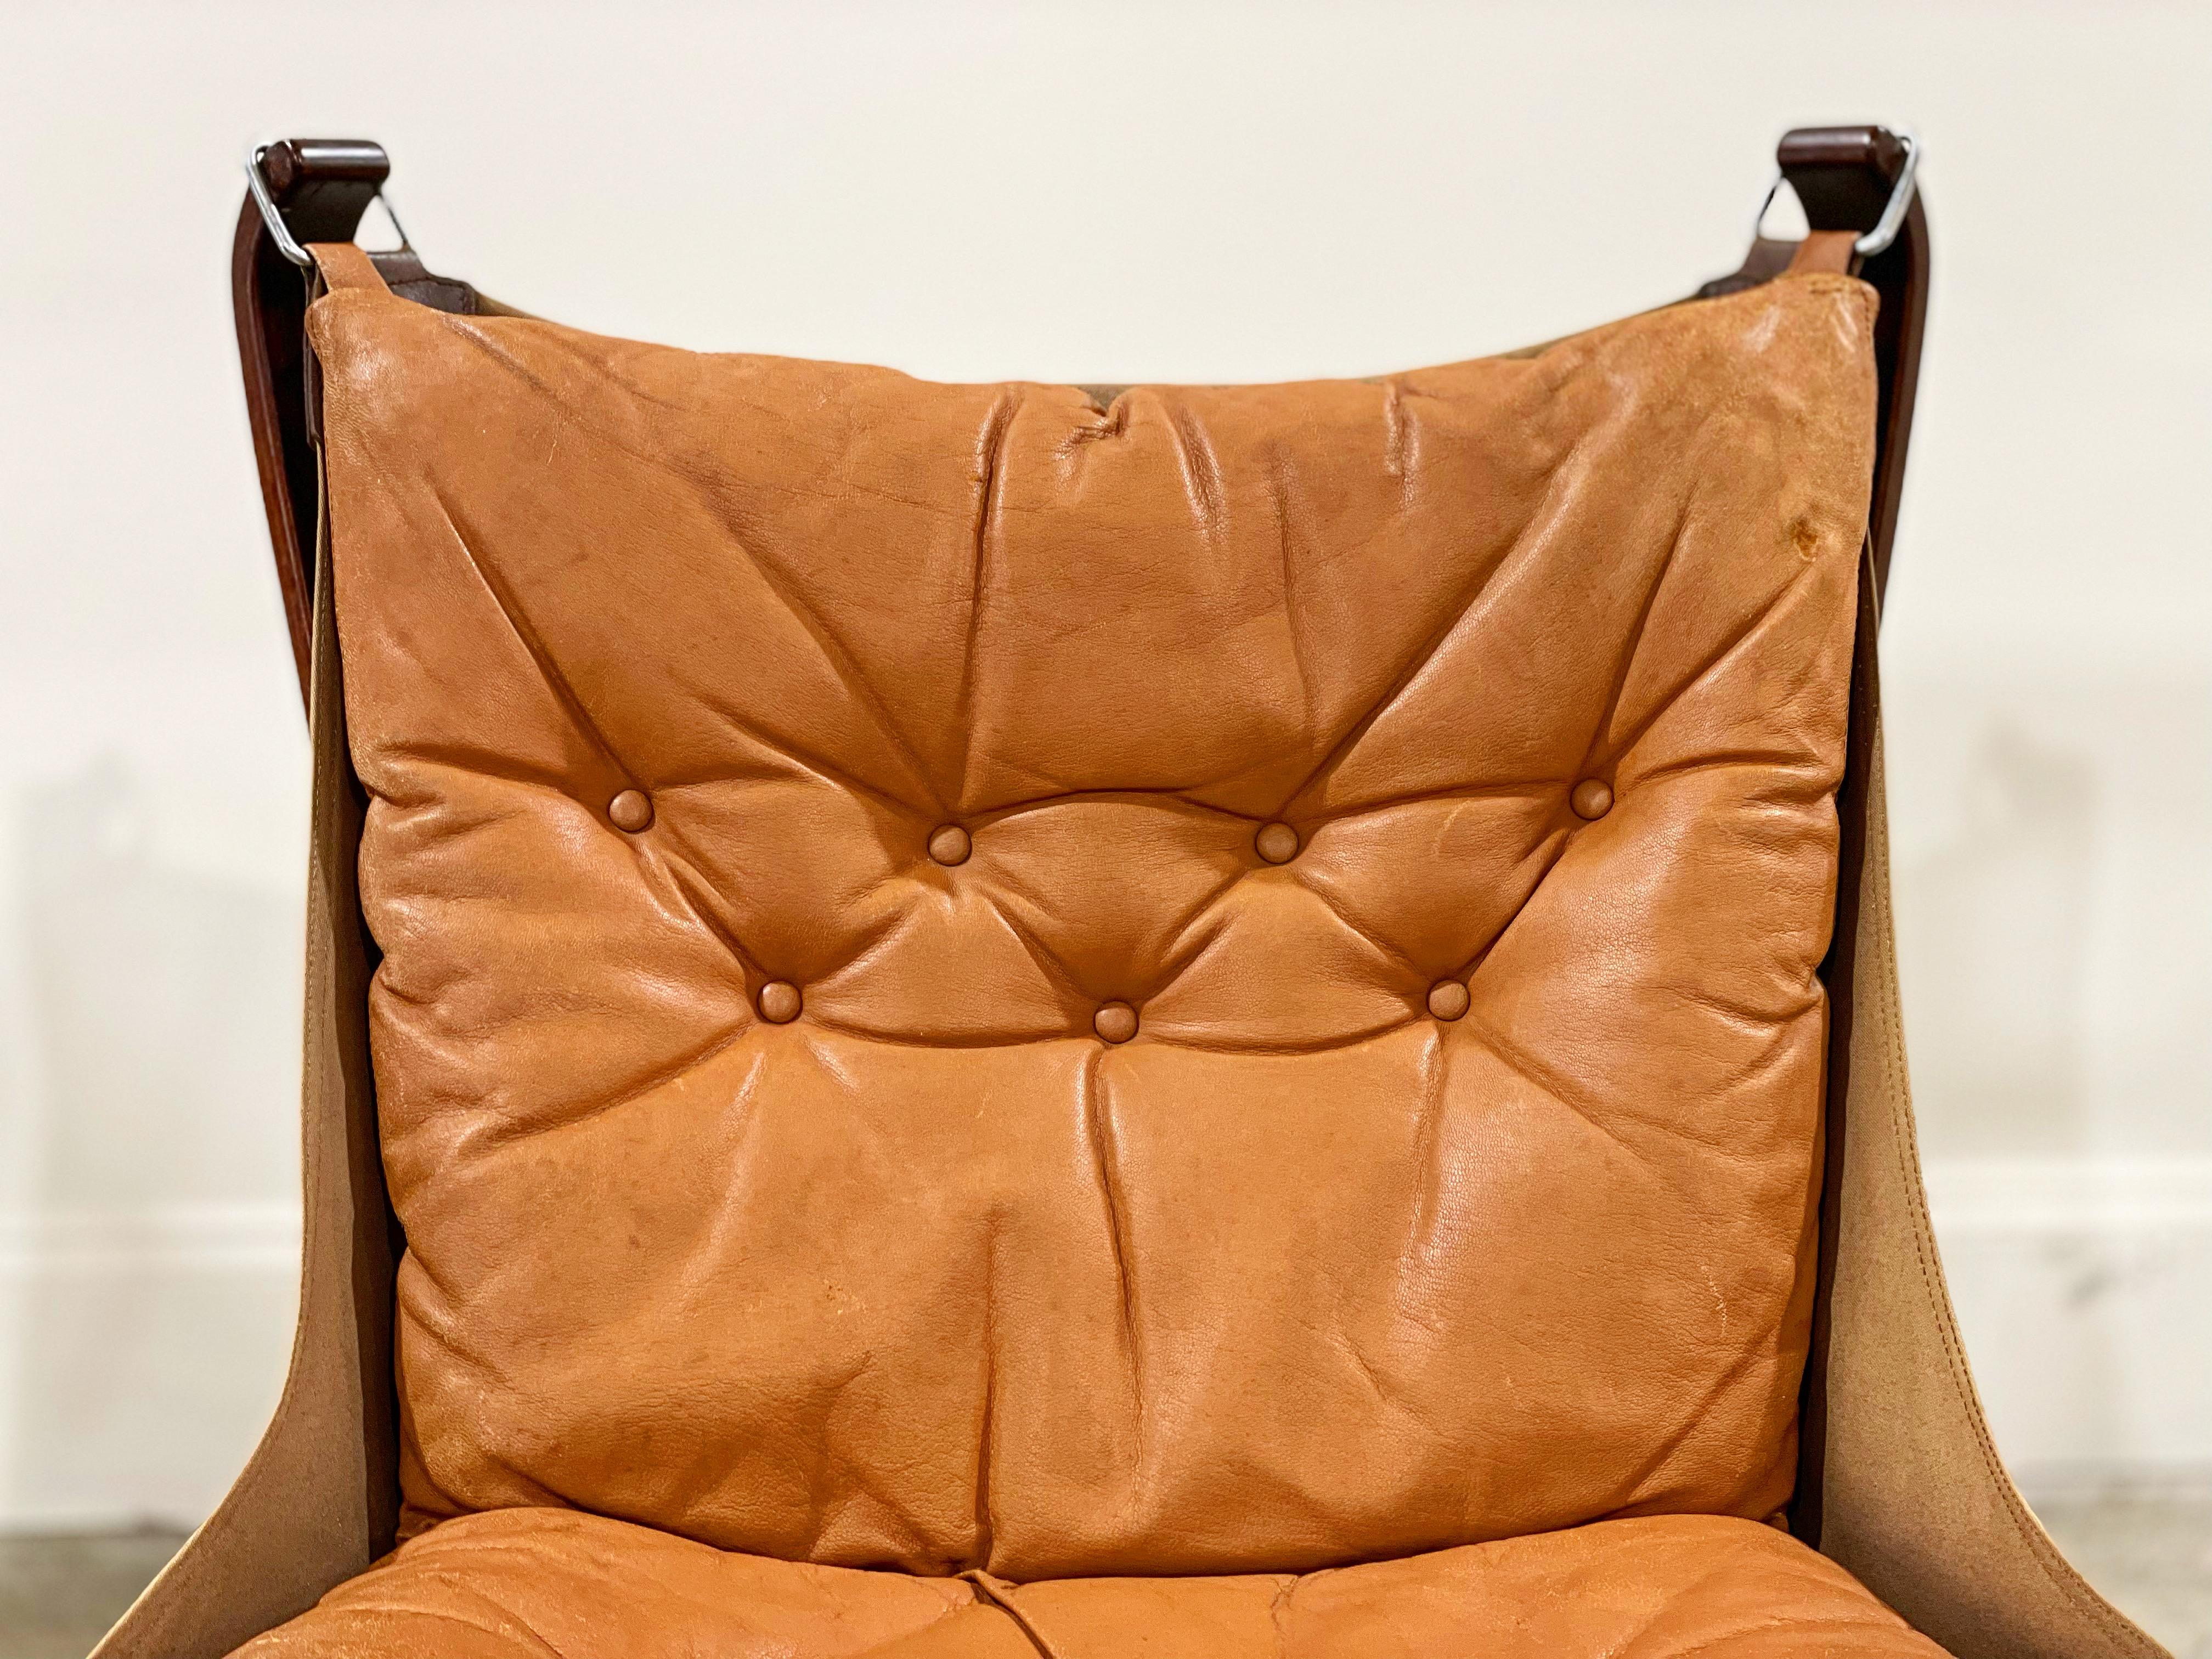 Mid-20th Century Falcon Chair by Sigurd Ressell for Vatne Mobler, Cognac Leather, Sweden, 1965